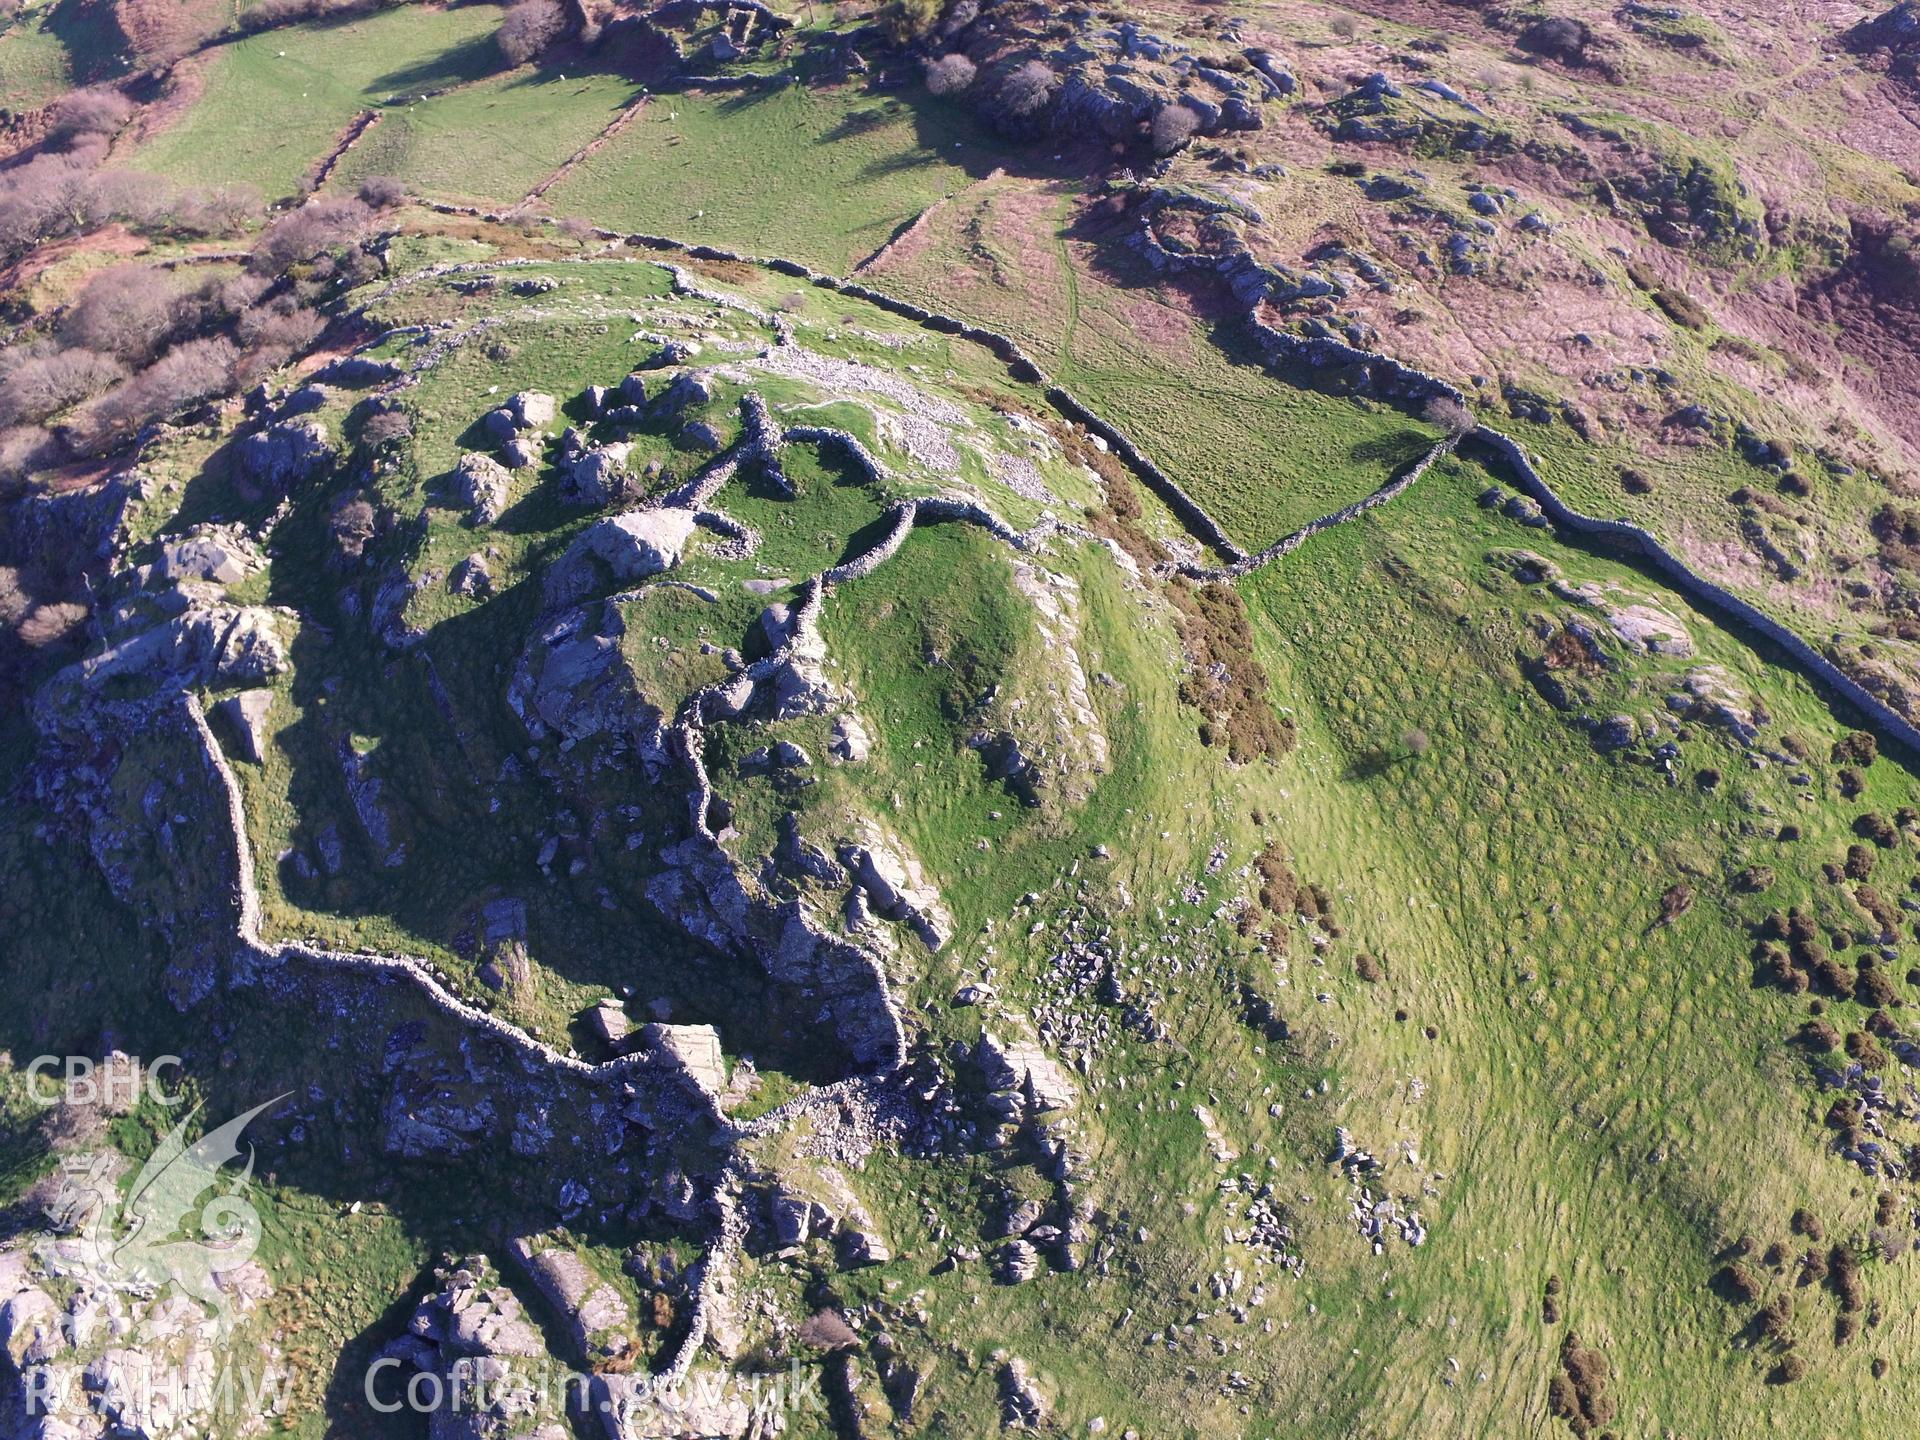 Colour photo showing aerial view of sheepfold south west of Garnedd Wen, taken by Paul R. Davis, 20th April 2018.